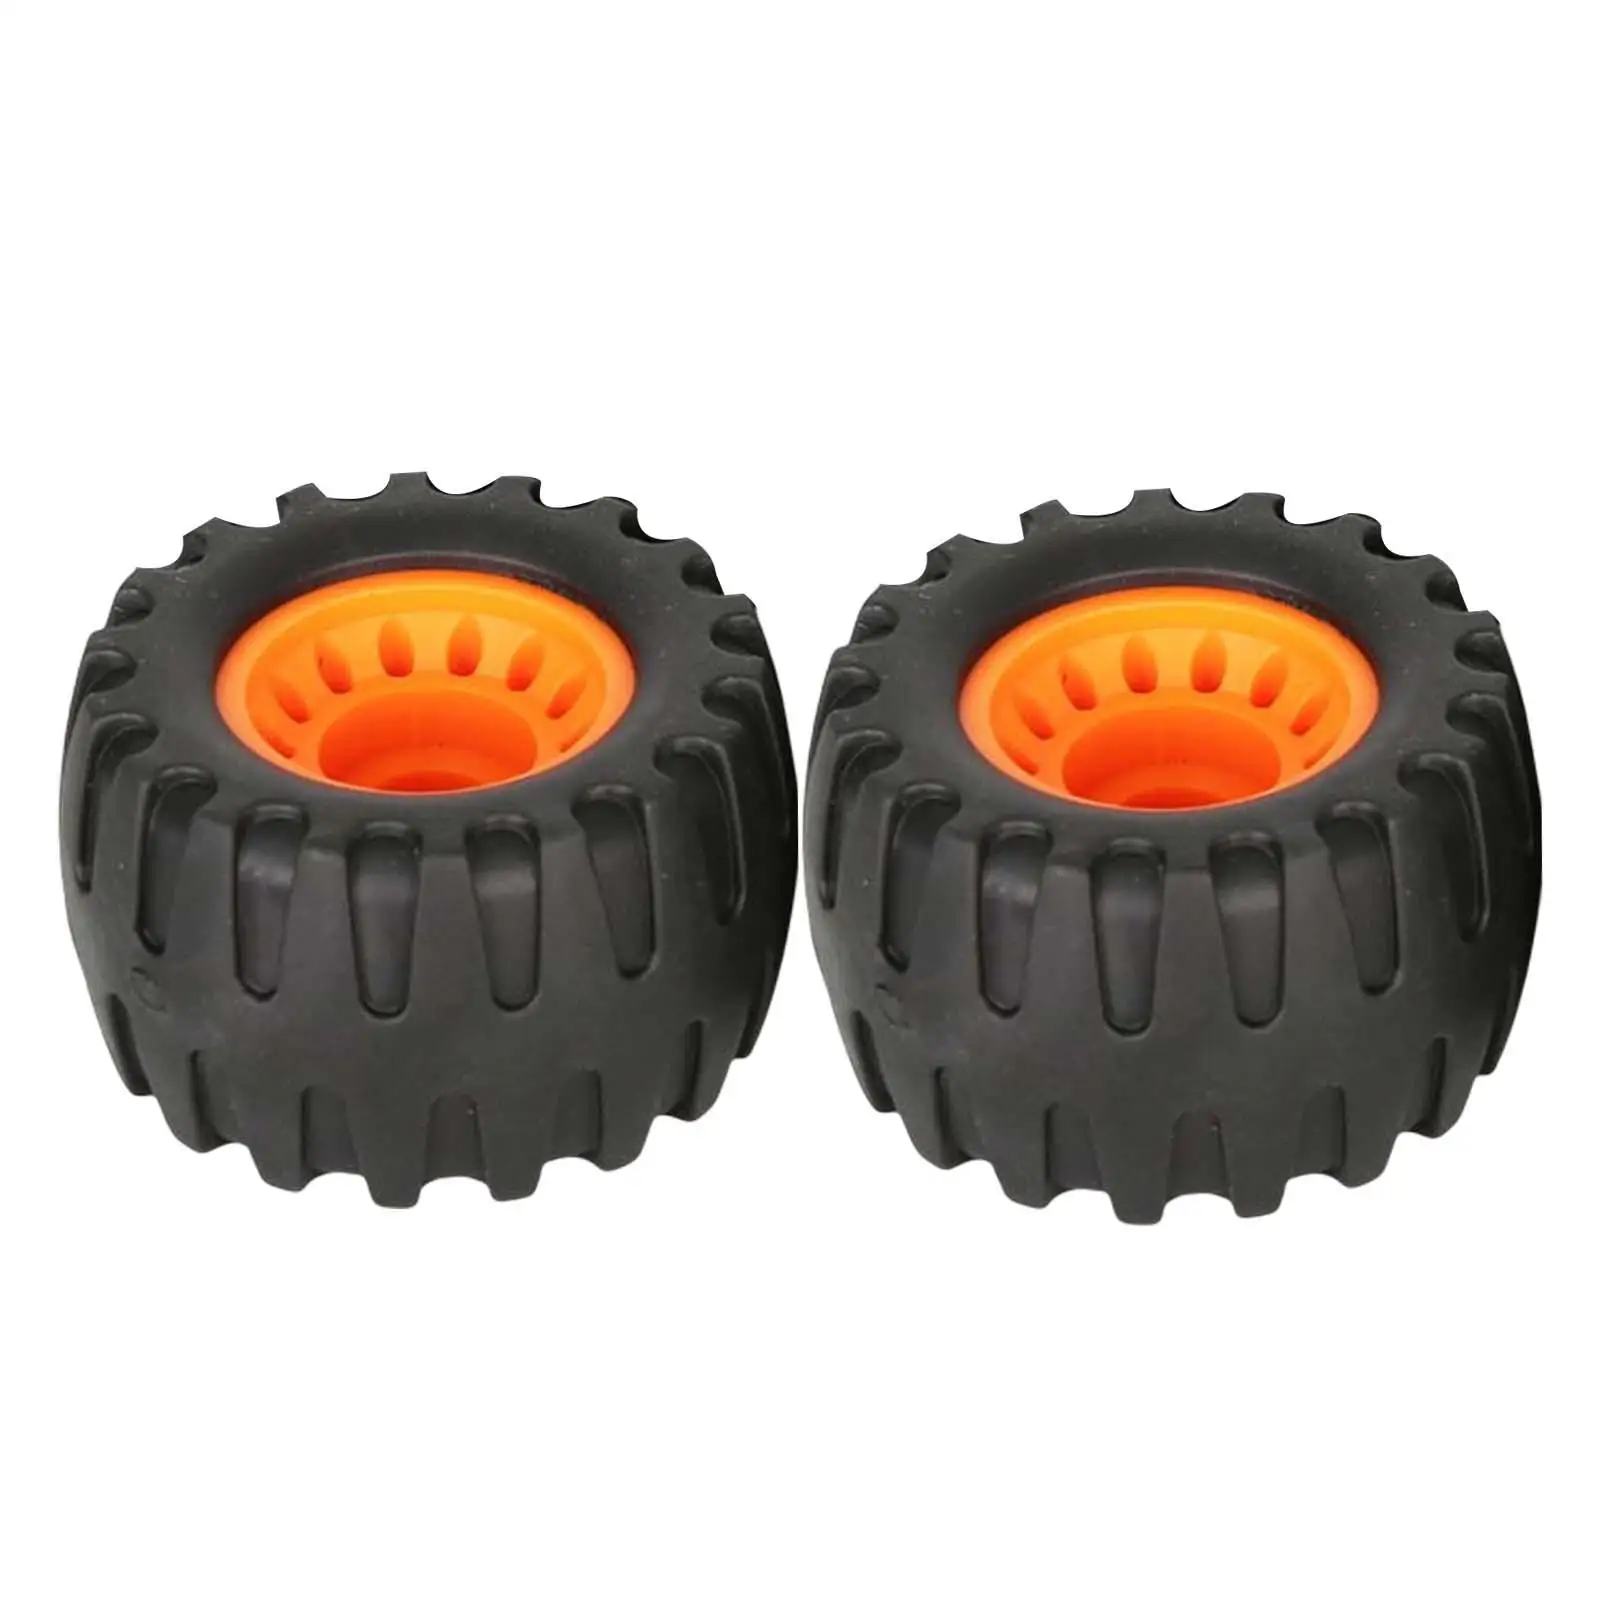 2Pcs Skateboard Wheels Repair Parts Replacement Smooth 78A Longboard Wheels for All Terrain Street Off Road Electric Skateboard